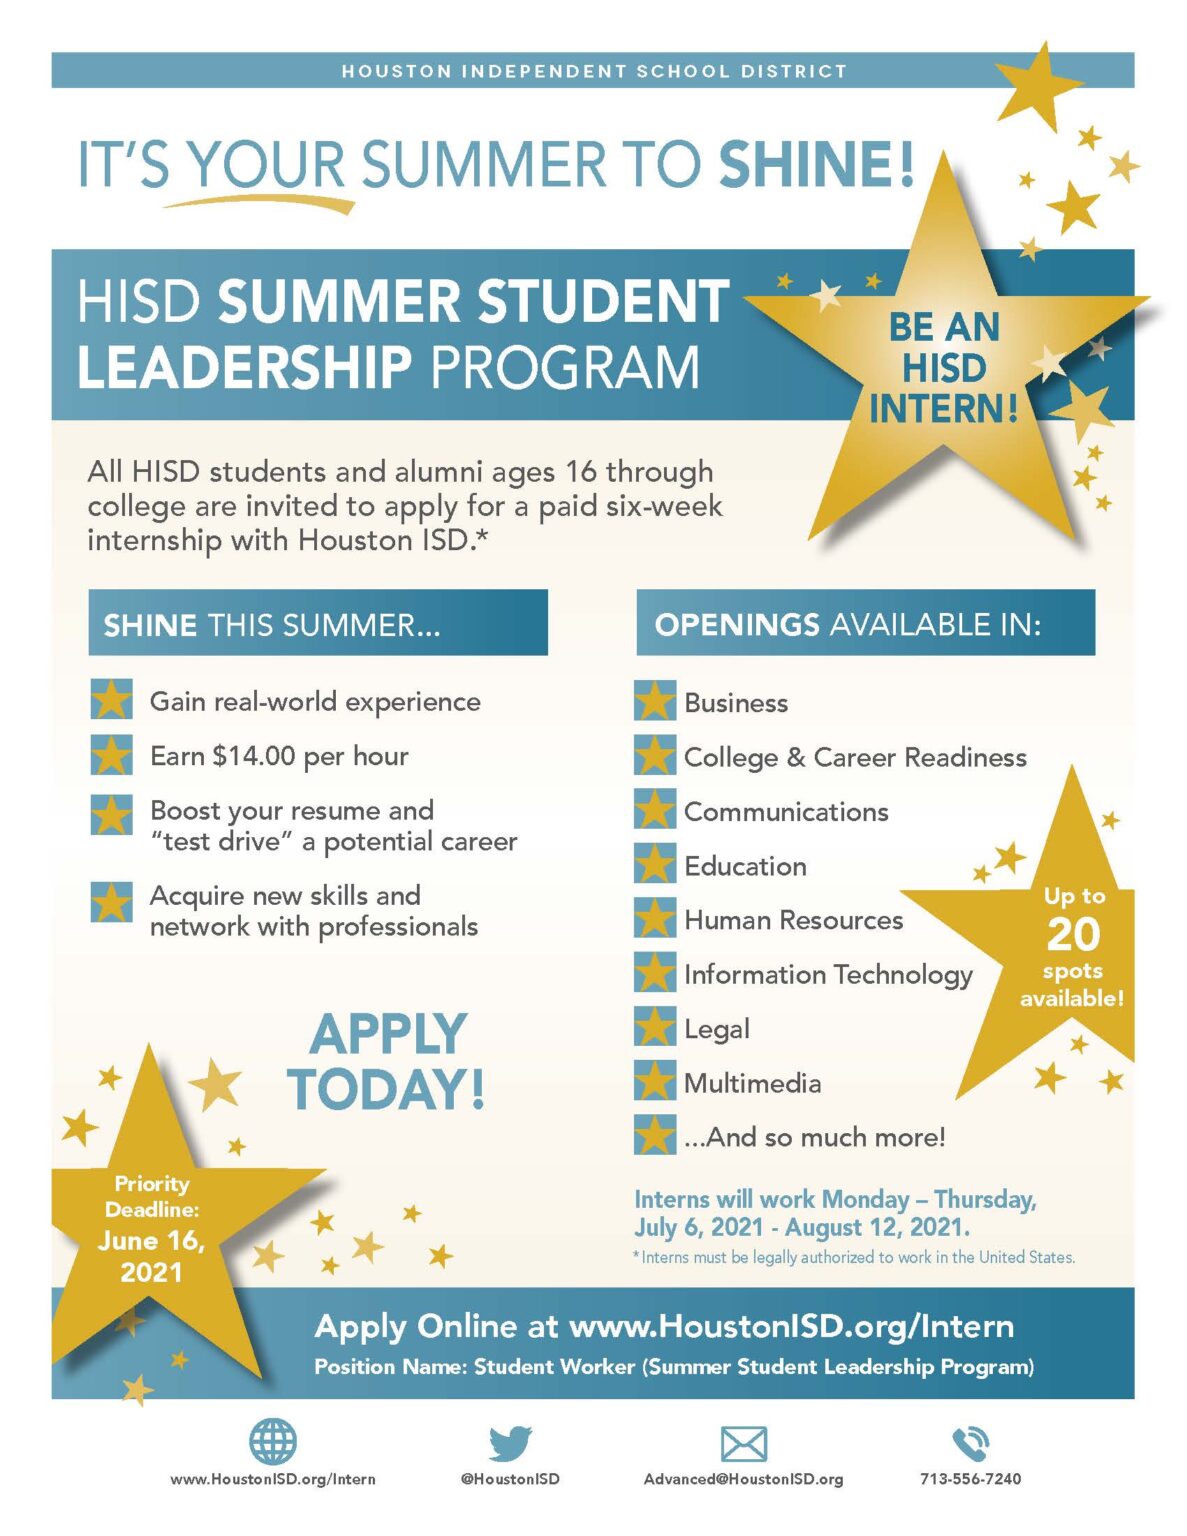 Summer Student Leadership Program accepting applications from high